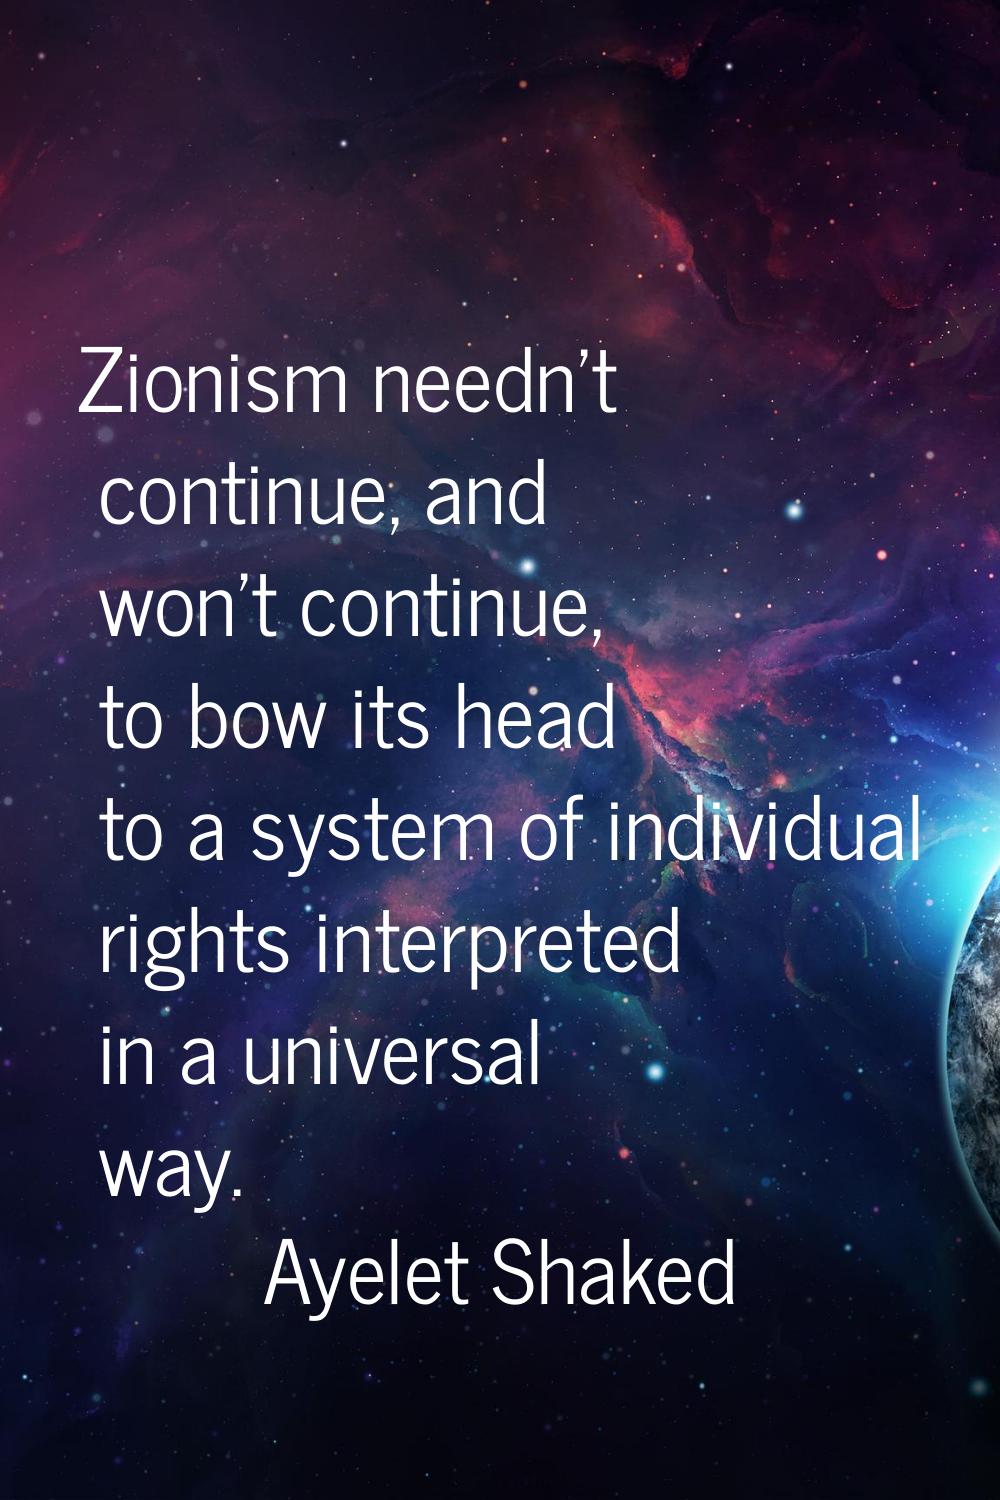 Zionism needn't continue, and won't continue, to bow its head to a system of individual rights inte